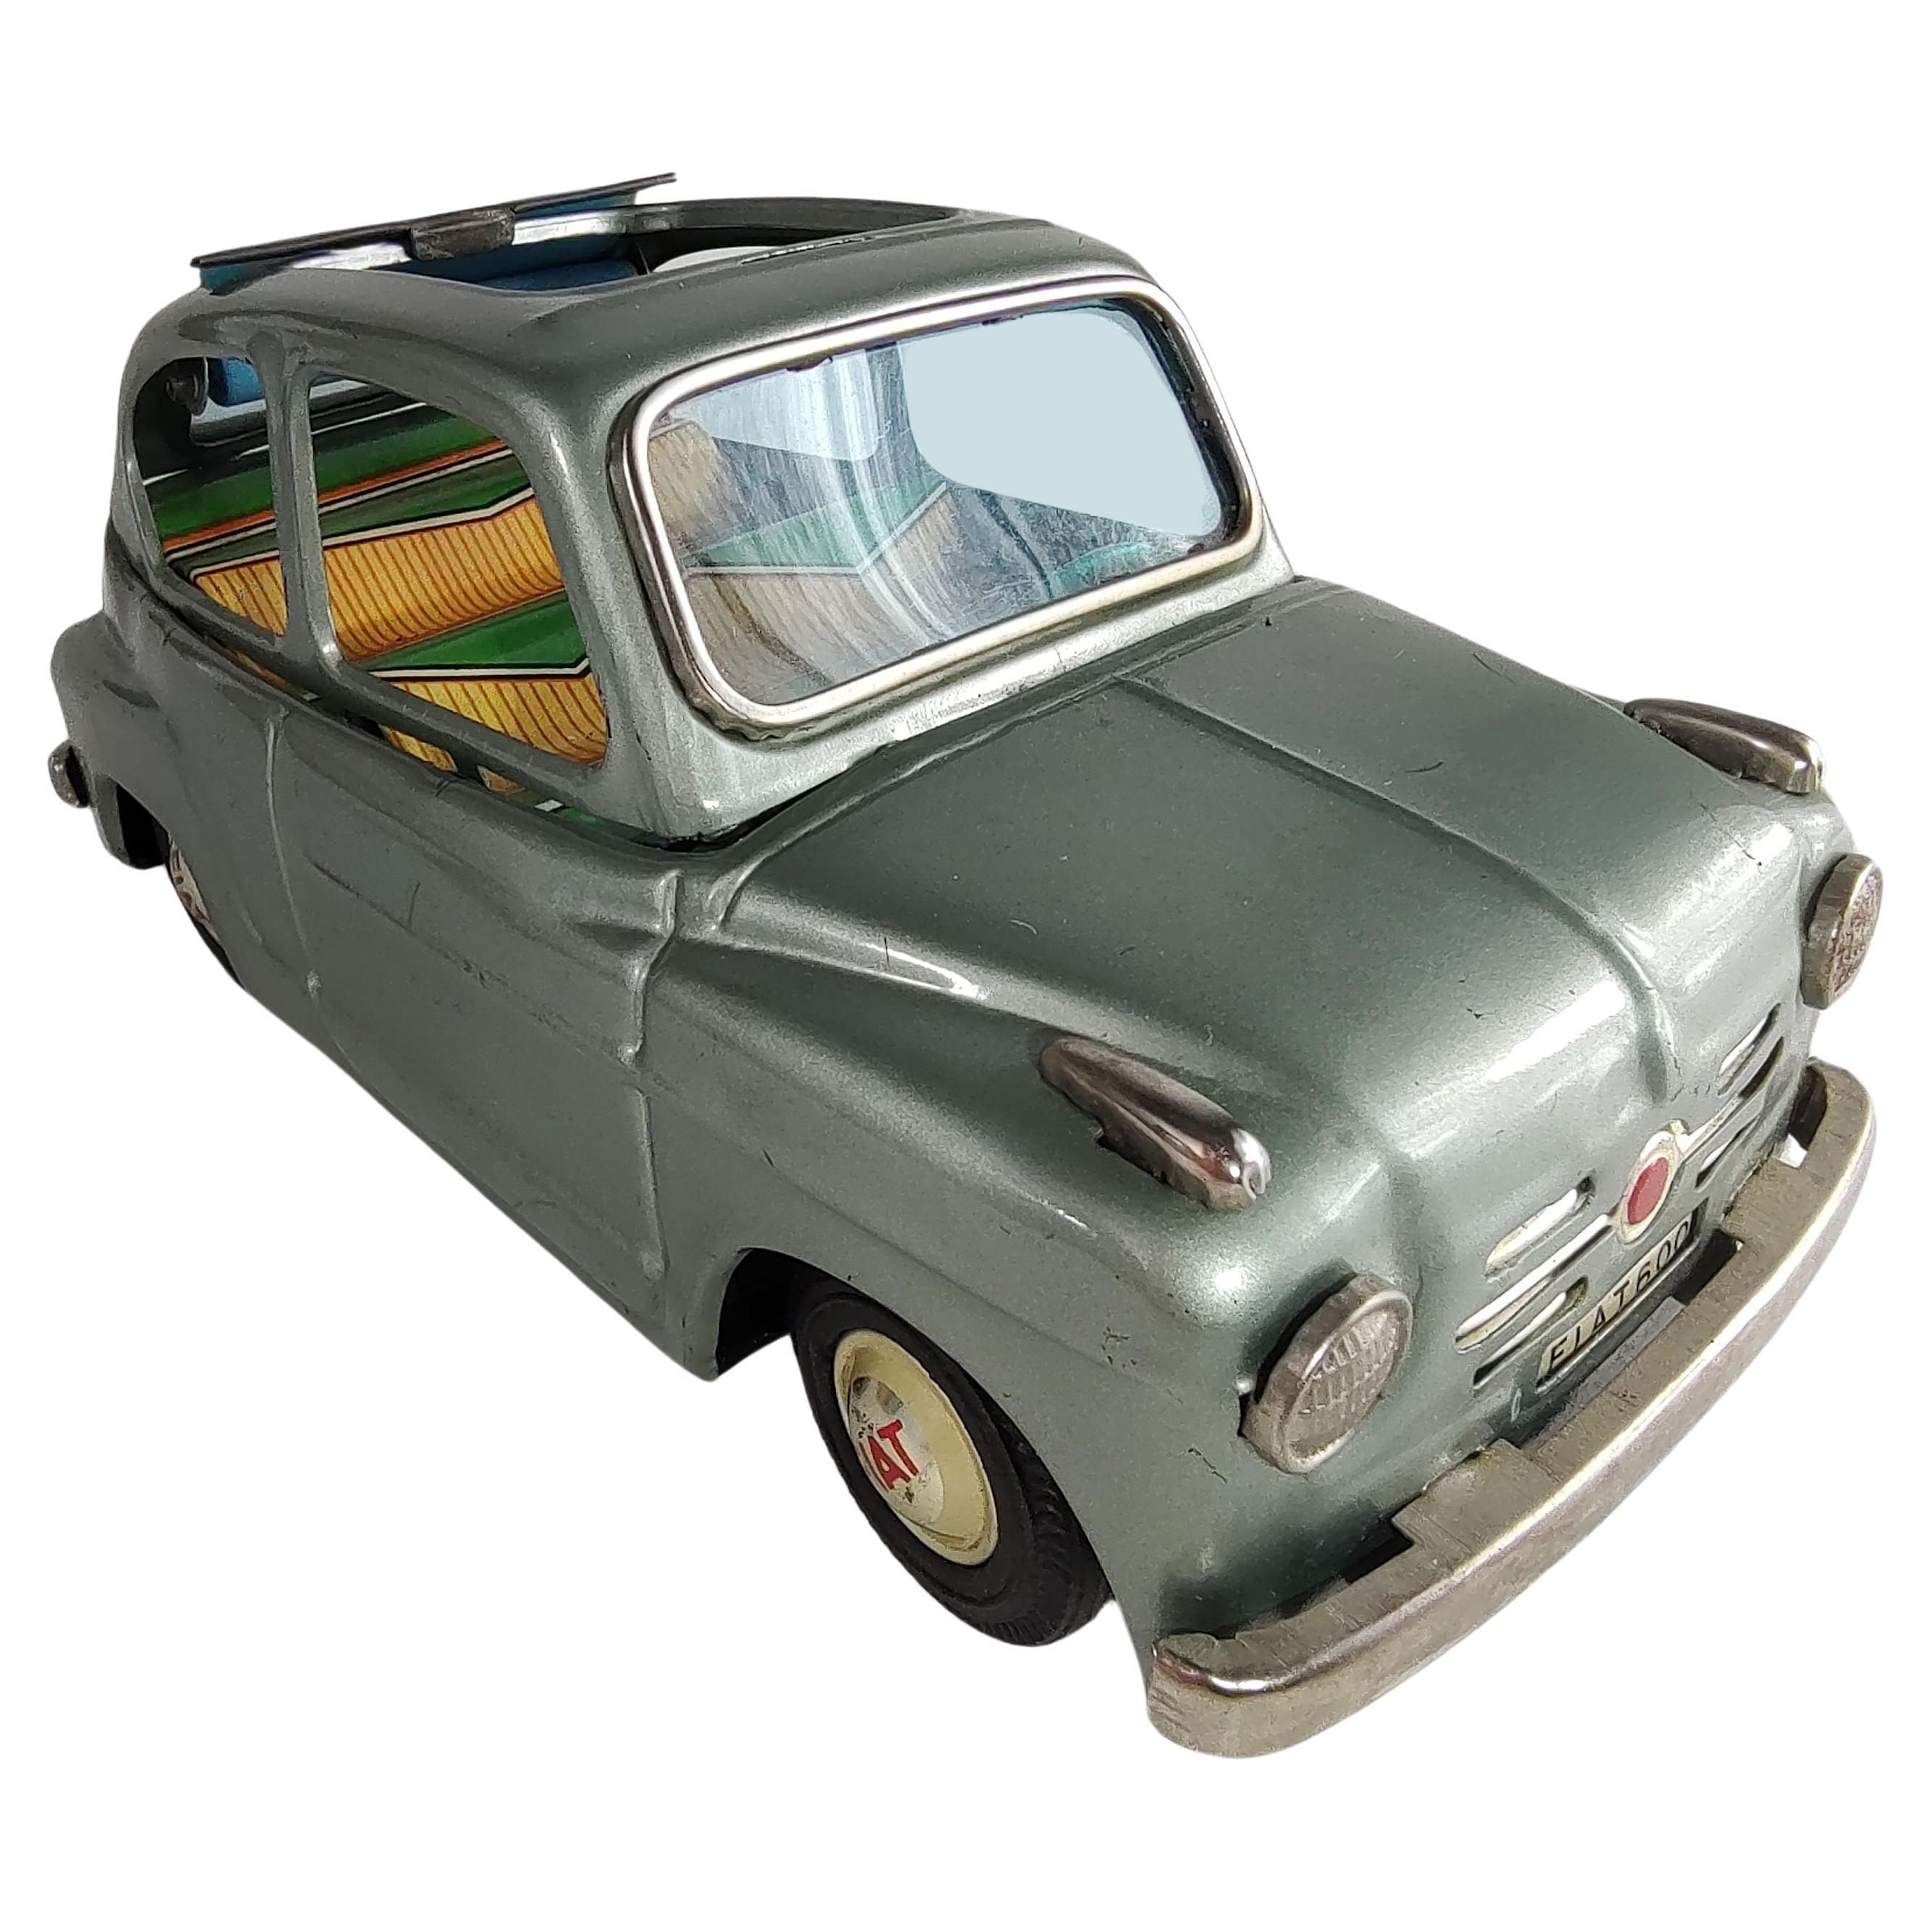 Midcentury Friction Tin Litho Soft Top Toy Car Fiat 600 by Bandai Japan